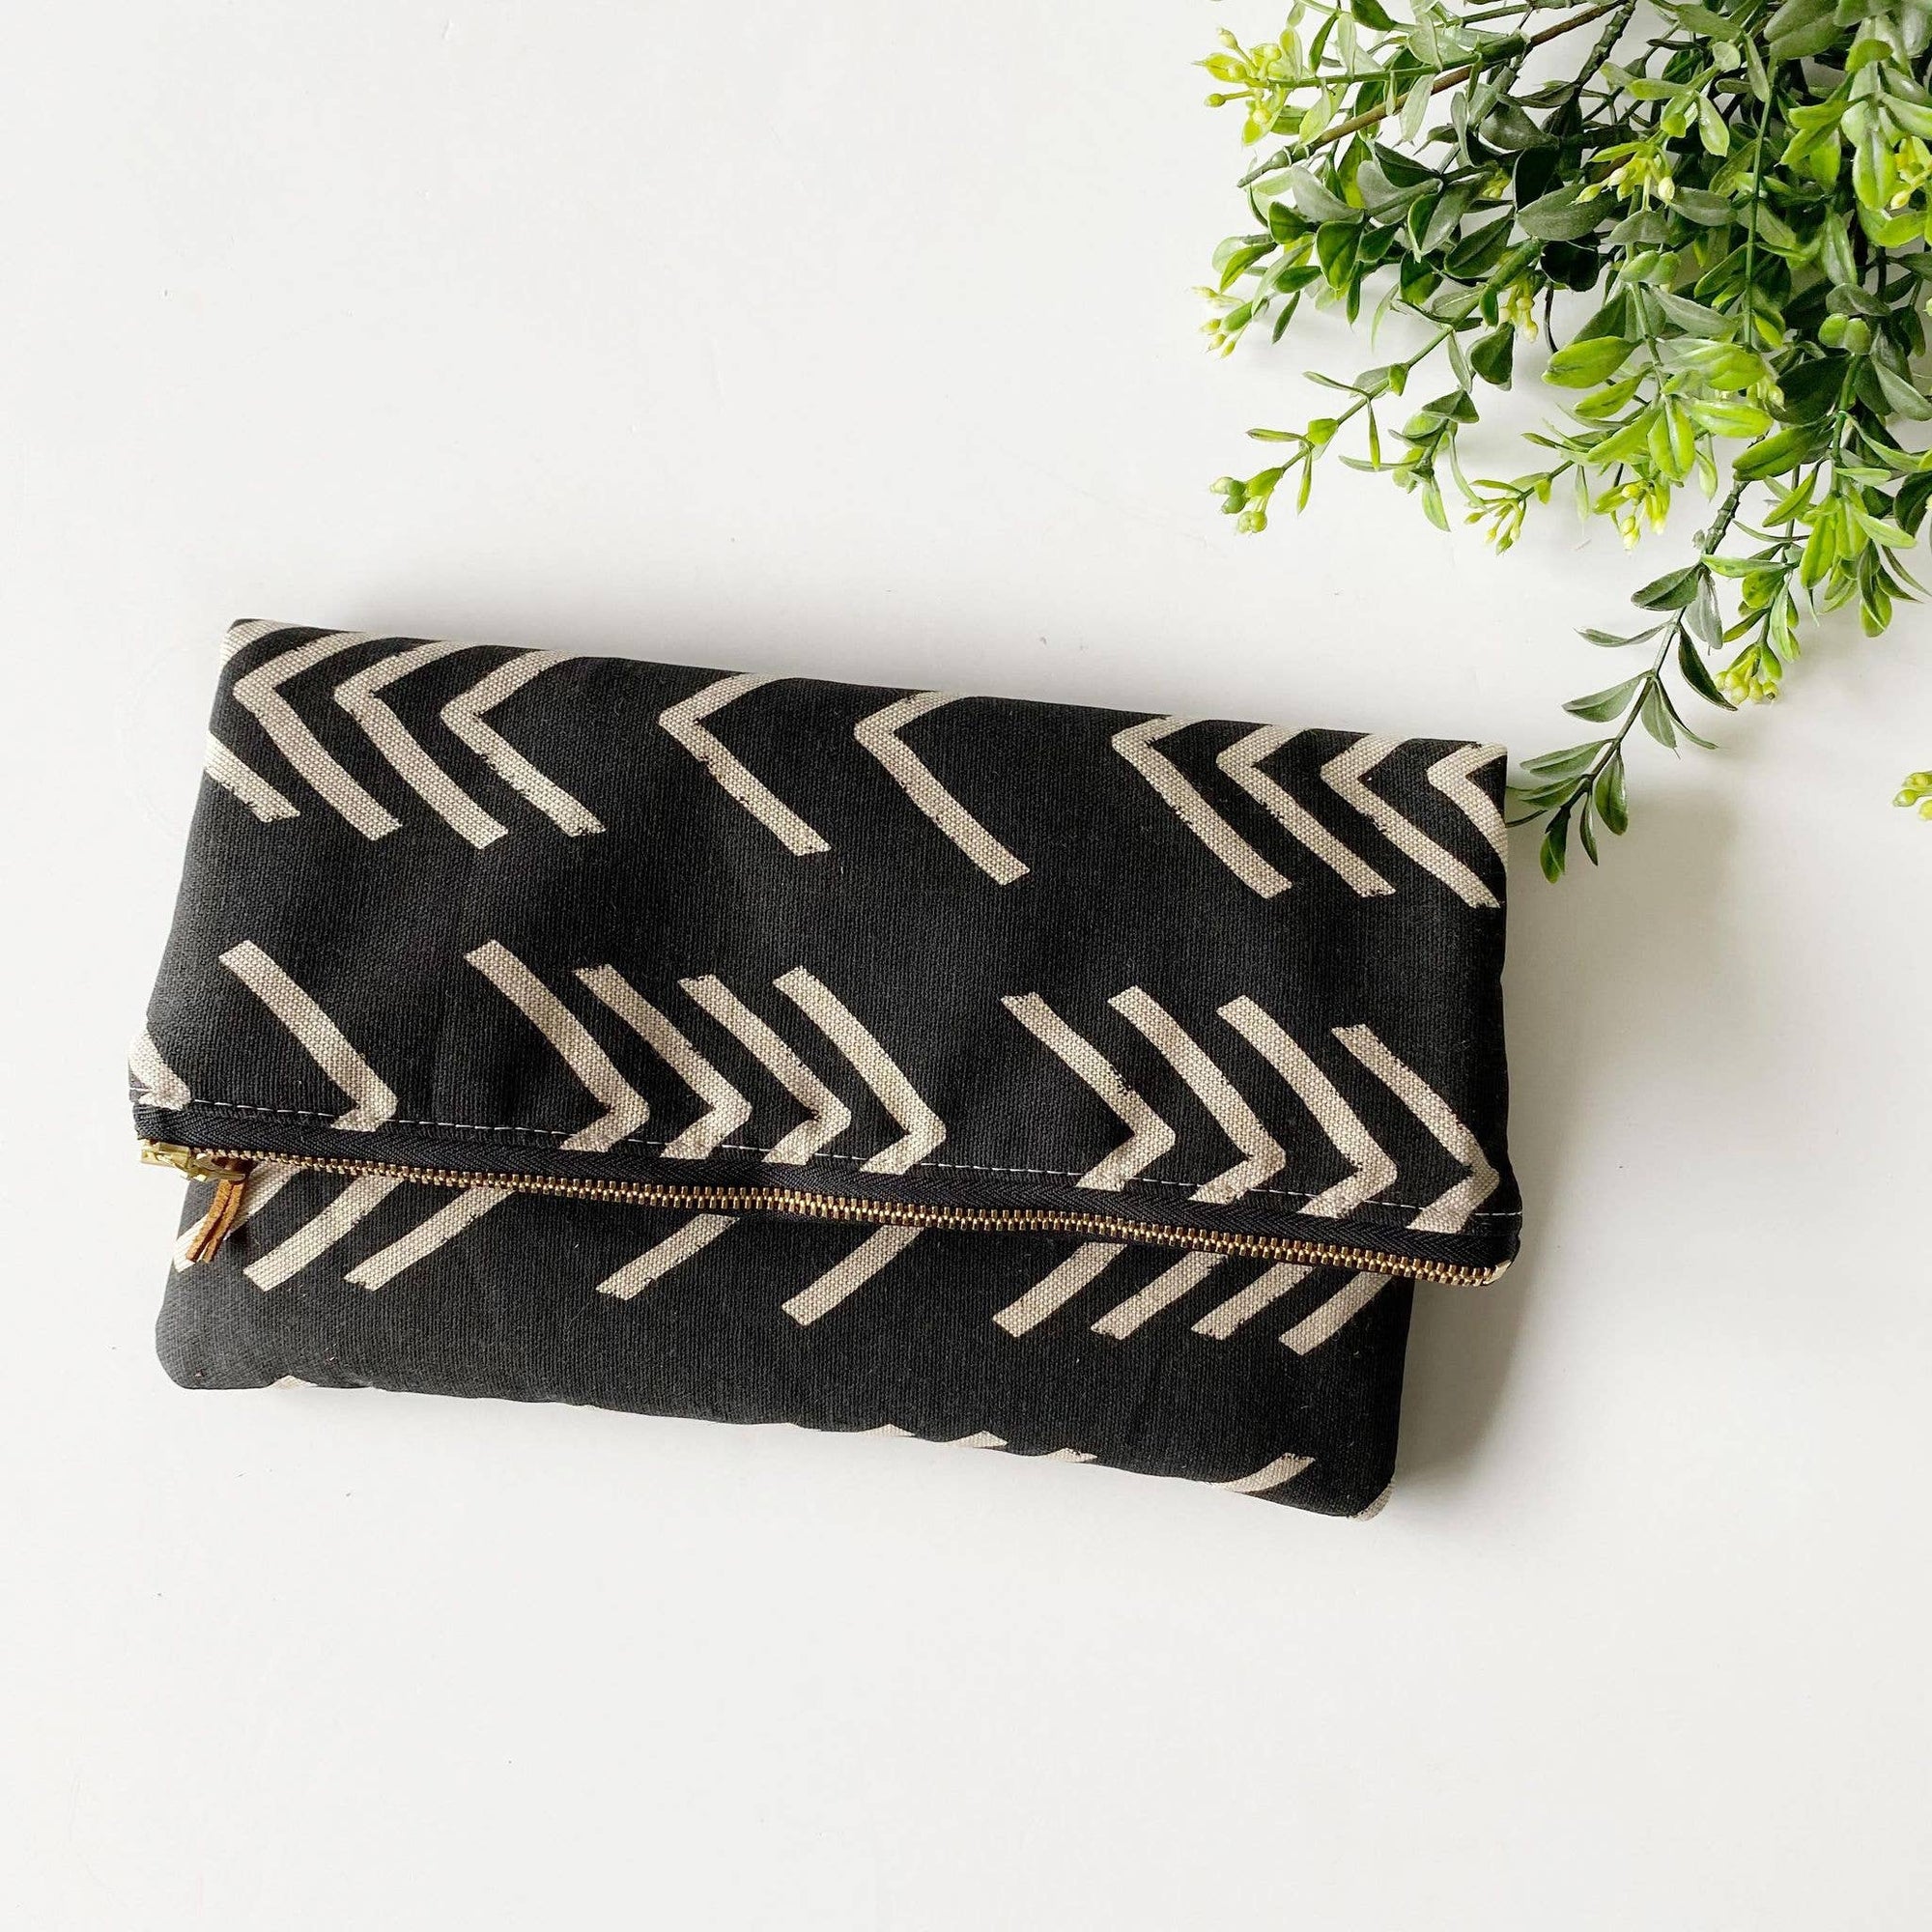 Large foldover clutch in black and cream arrow